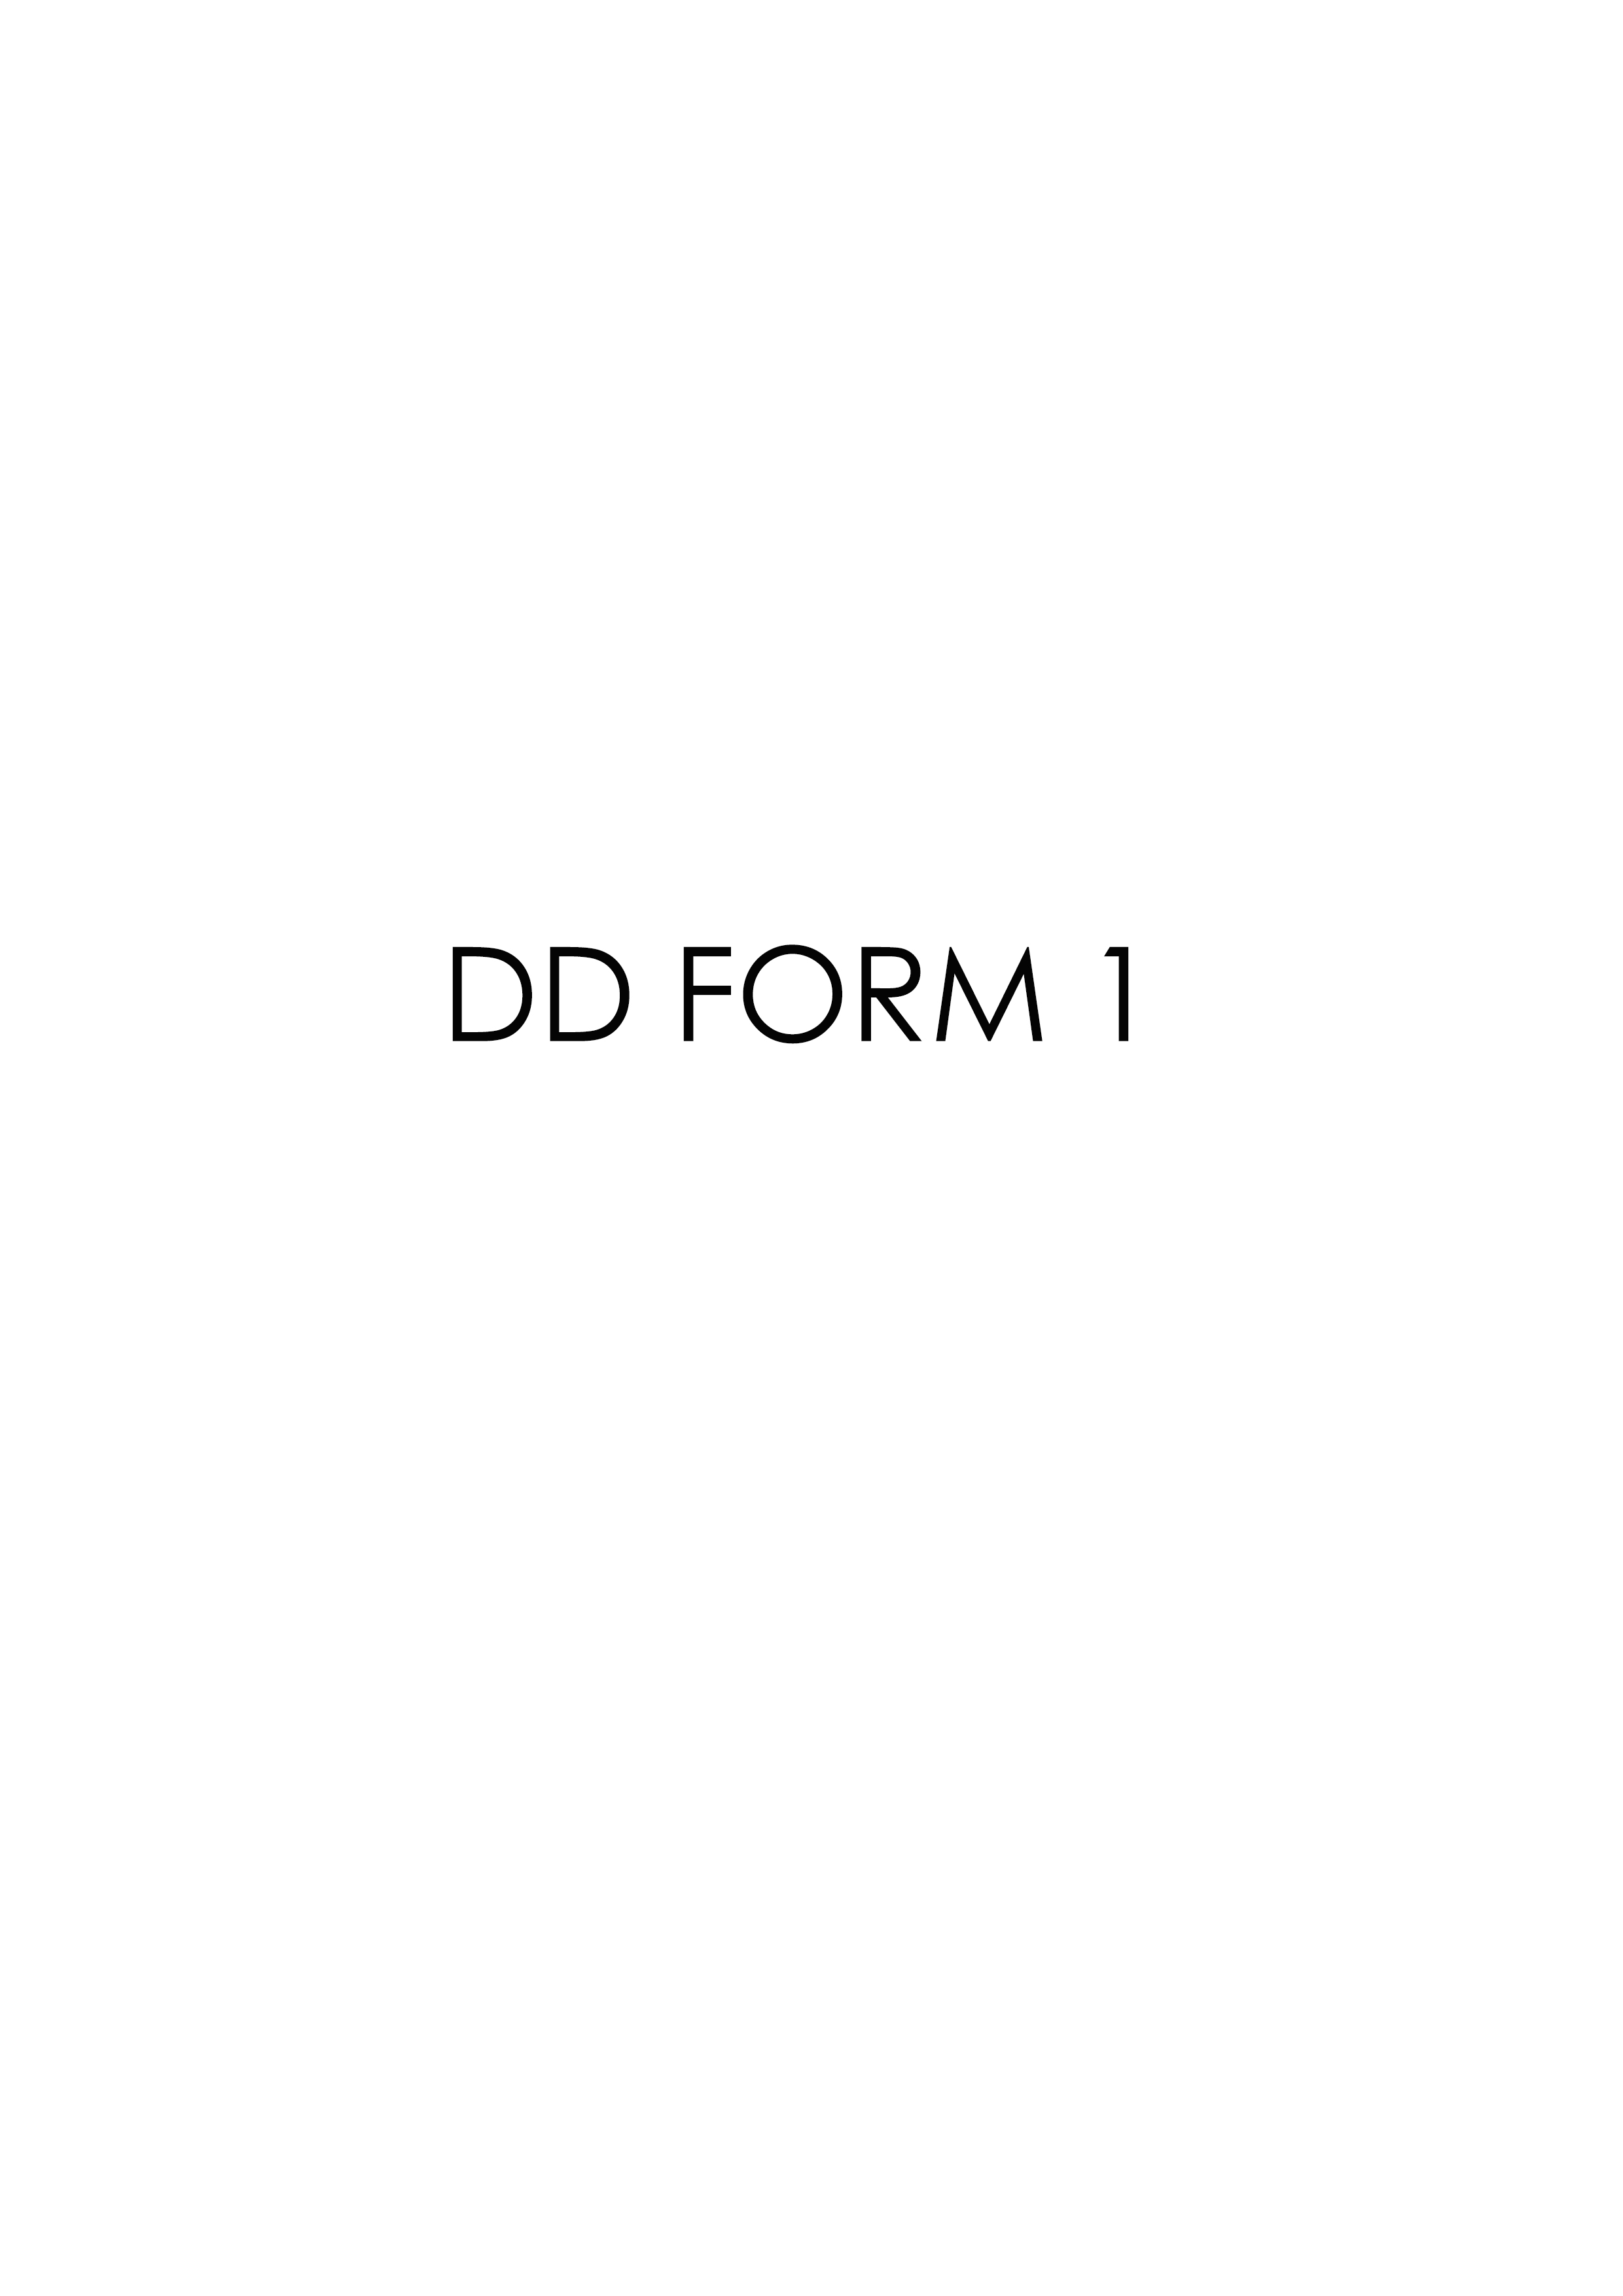 dd Form 1 fillable